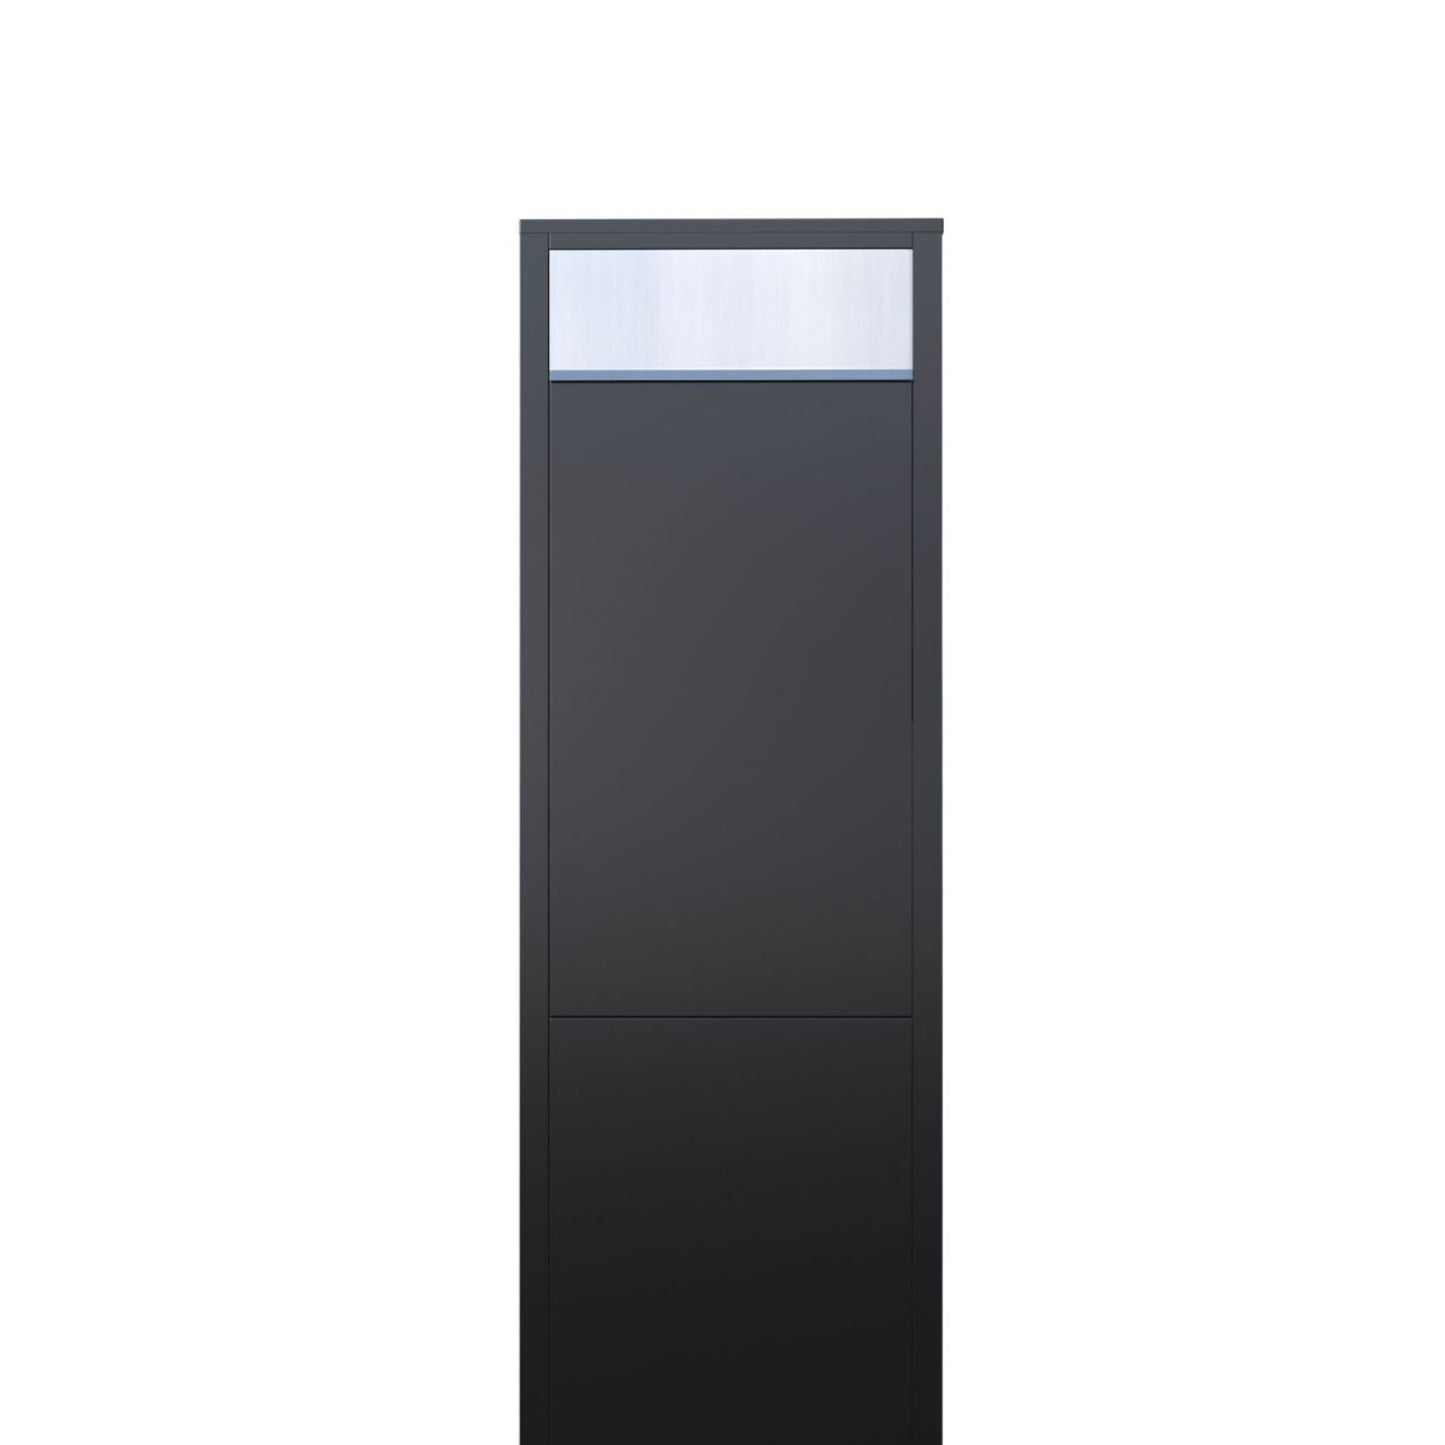 BIG BOX by Bravios - Modern stand-alone black mailbox with stainless steel flap